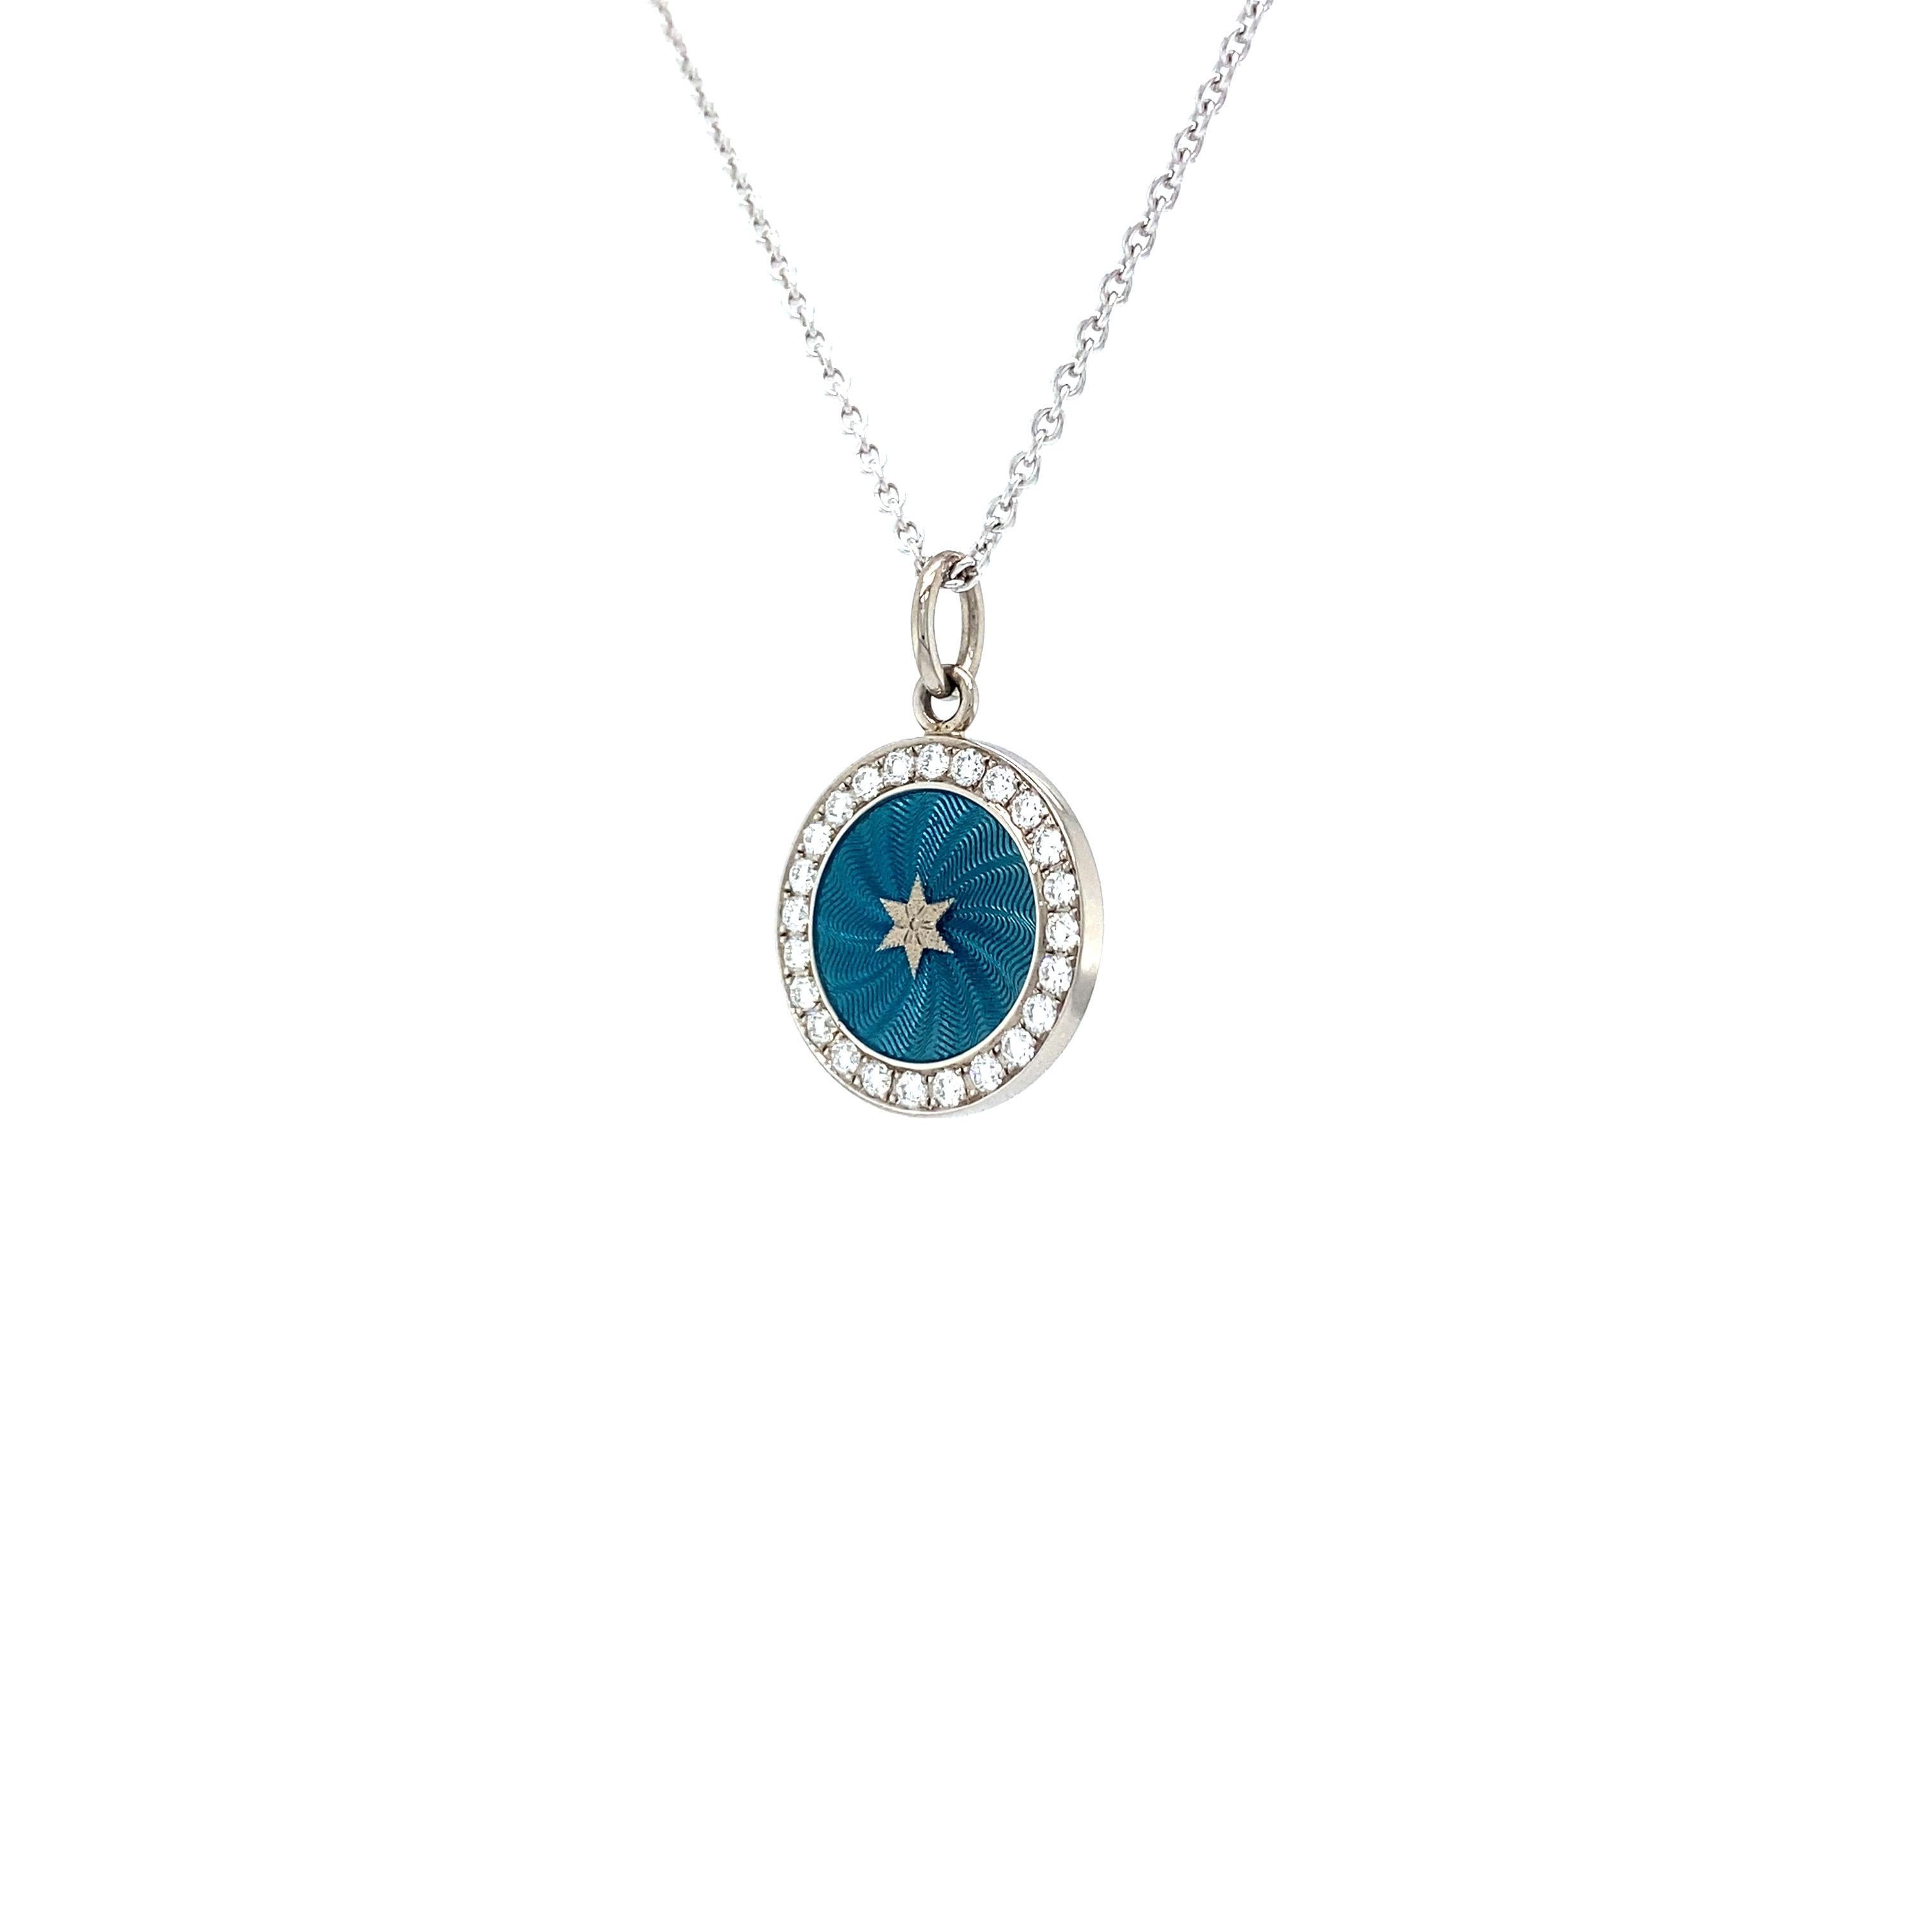 Victor Mayer round disc pendant necklace with star 18k white gold, Diskos Collection, translucent turquoise vitreous enamel, 24 diamonds, total 0.36 ct, G VS, diameter app. 15.0 mm

About the creator Victor Mayer
Victor Mayer is internationally